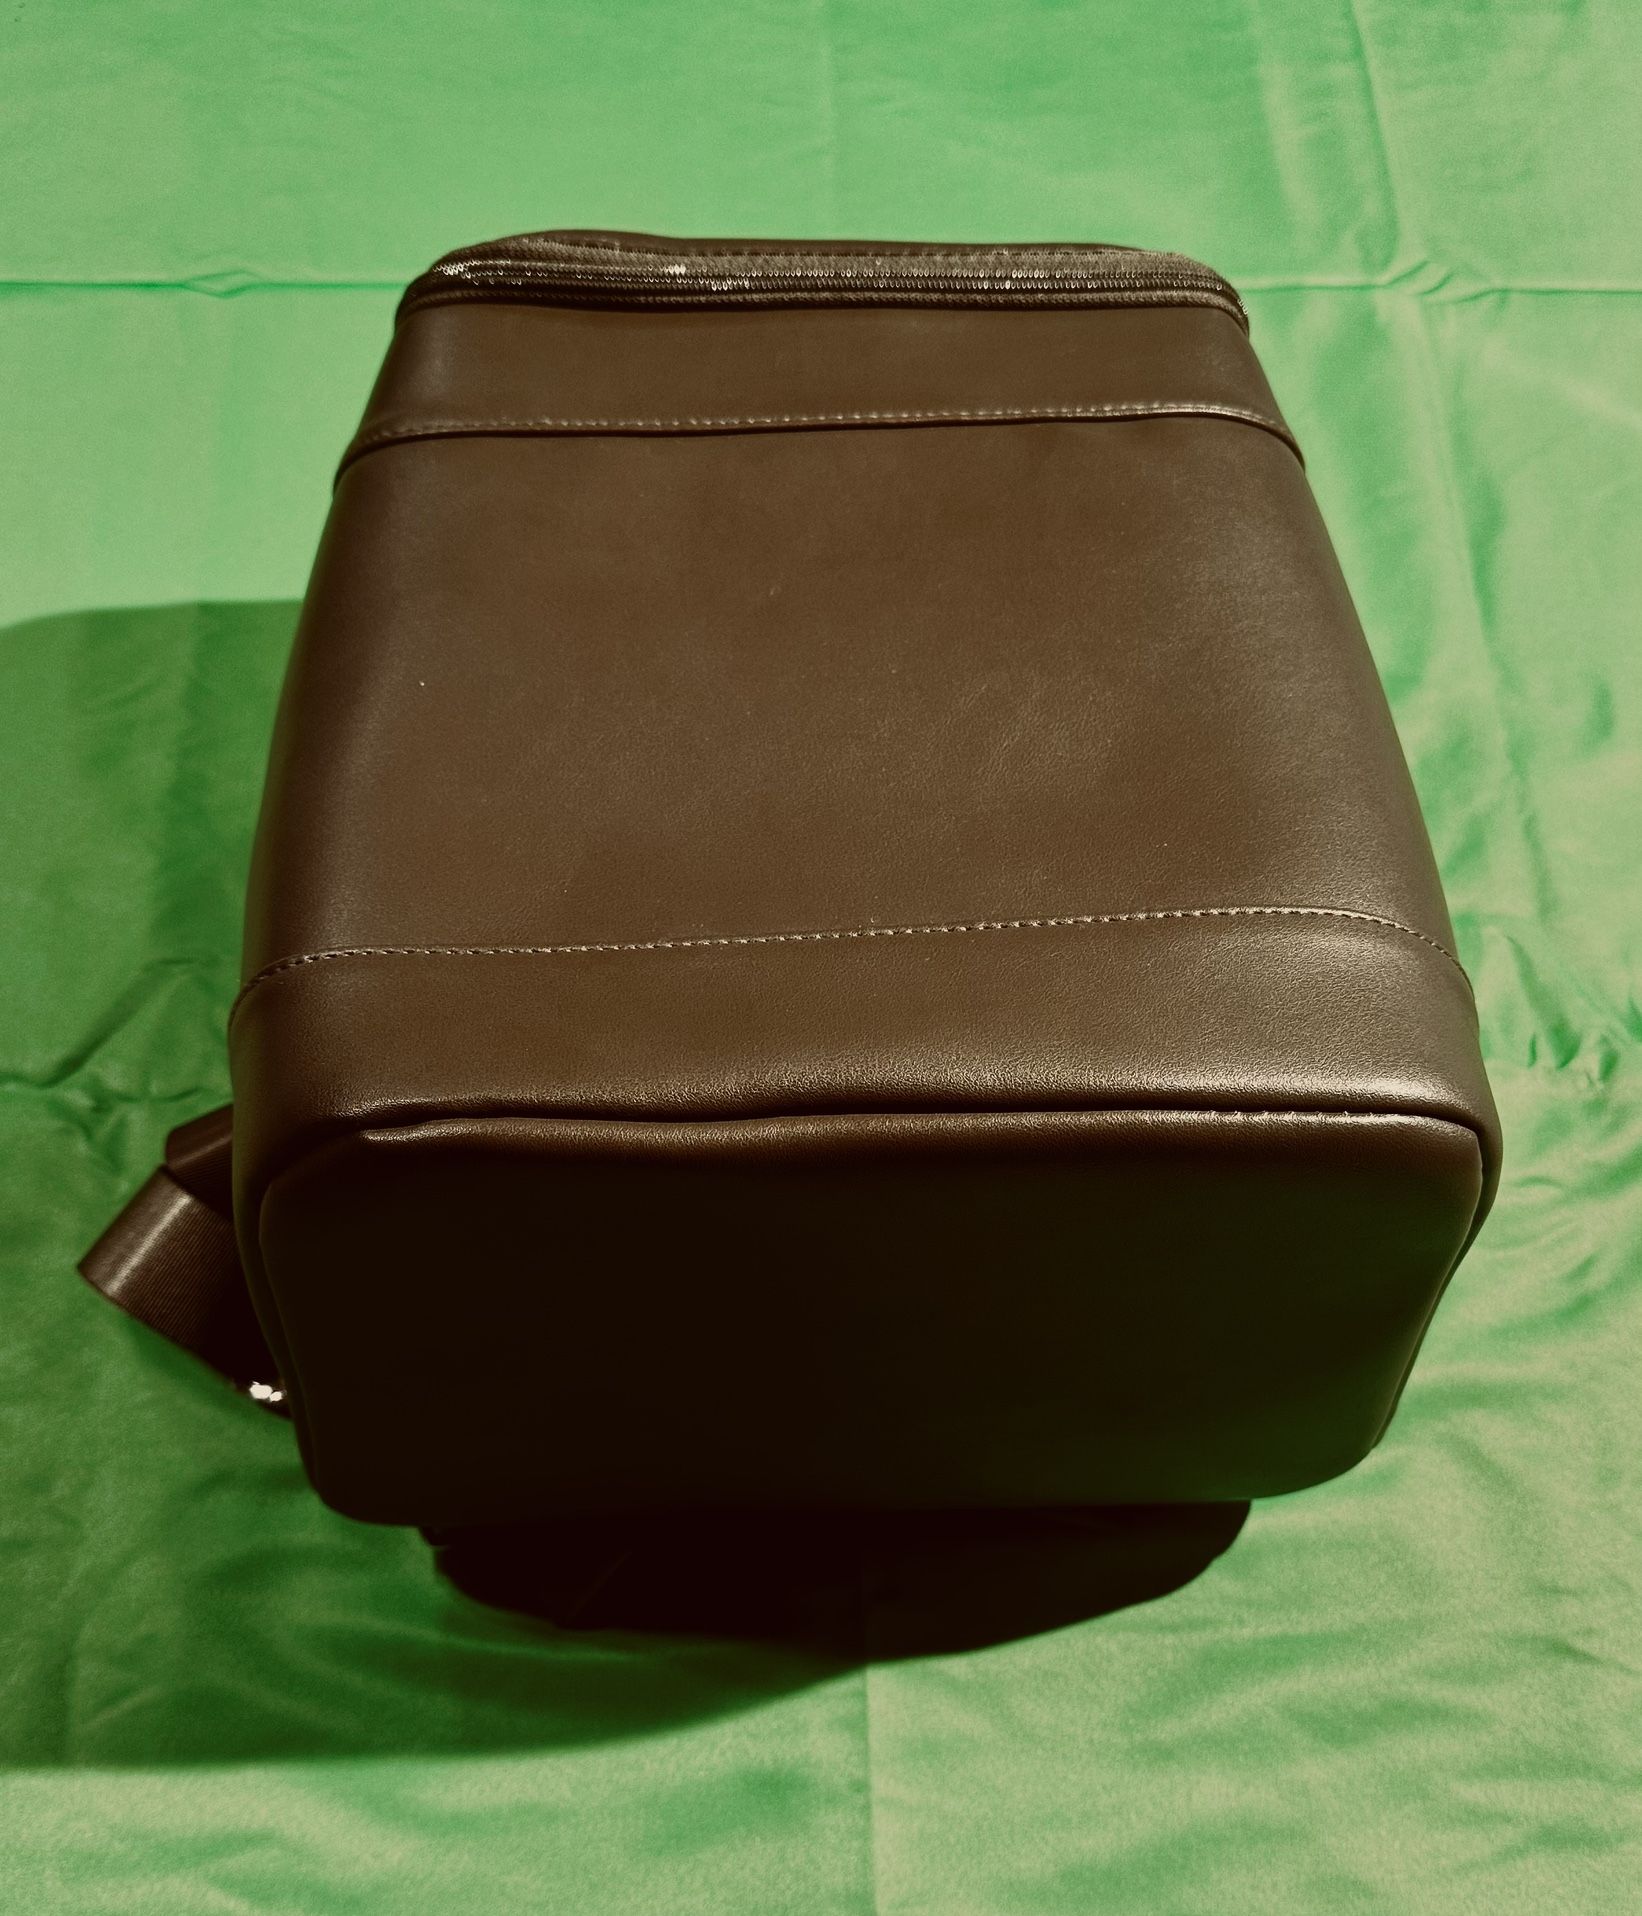 "Brown Faux Leather Cooler Backpack - Insulated, Stylish, & Fits 12 Cans!"